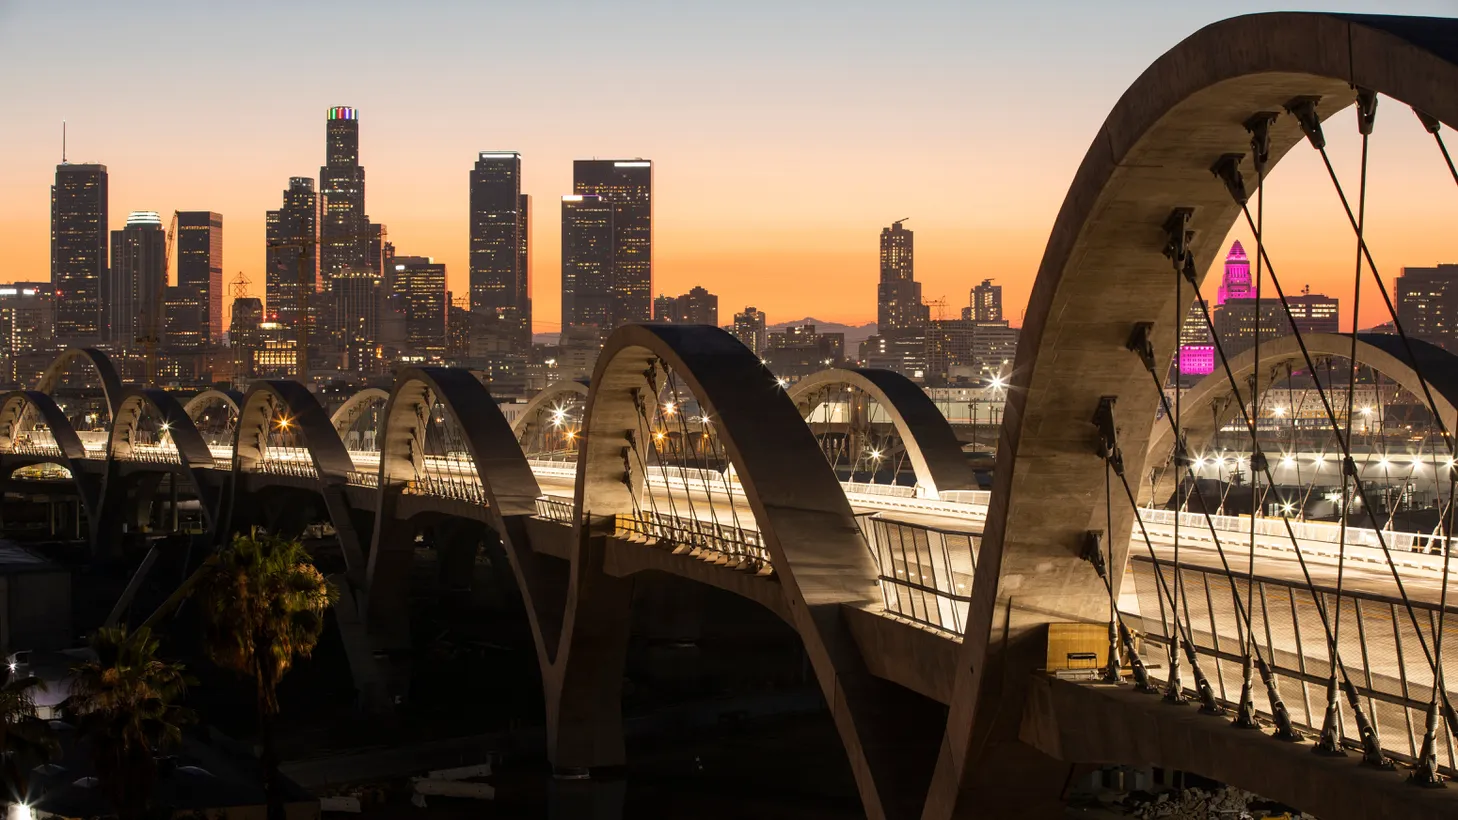 LA’s 6th Street Bridge has been a hit with its stunning views and lit-up archways, and officials were unprepared for Angelenos loving it a little too much, says commentator Joe Mathews.